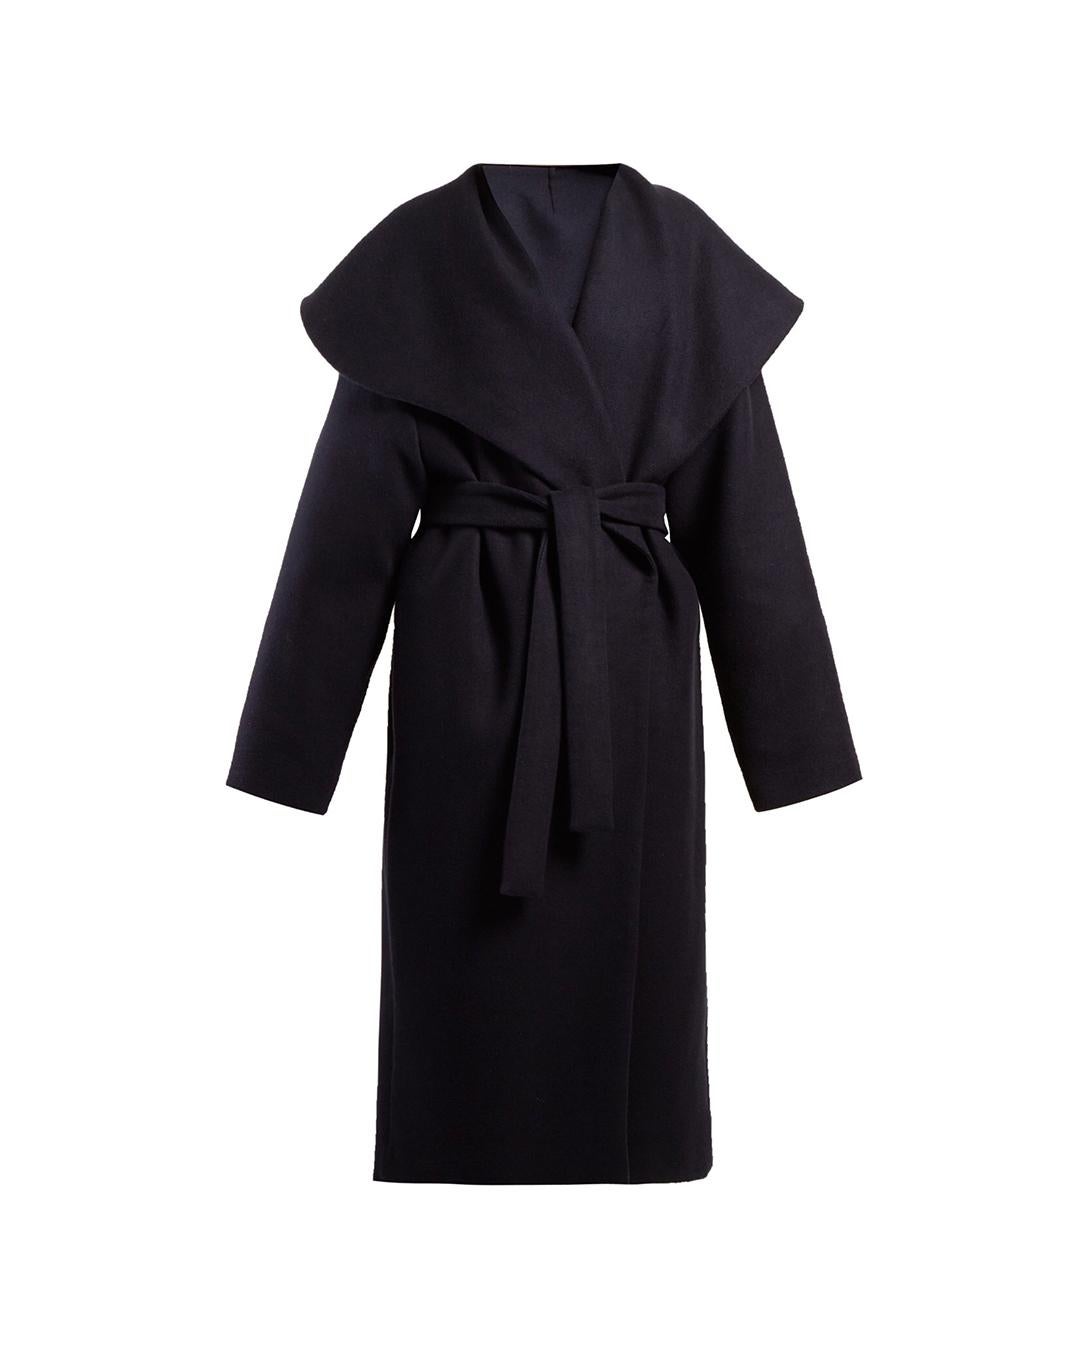 The Row 'Utan' coat in navy blue
Oversized fit with a large oversized shawl collar
Long sleeves
Self tie belt that can be detached 
Ankle length (Please note that the model is very tall and it therefore shows much shorter - please refer to the